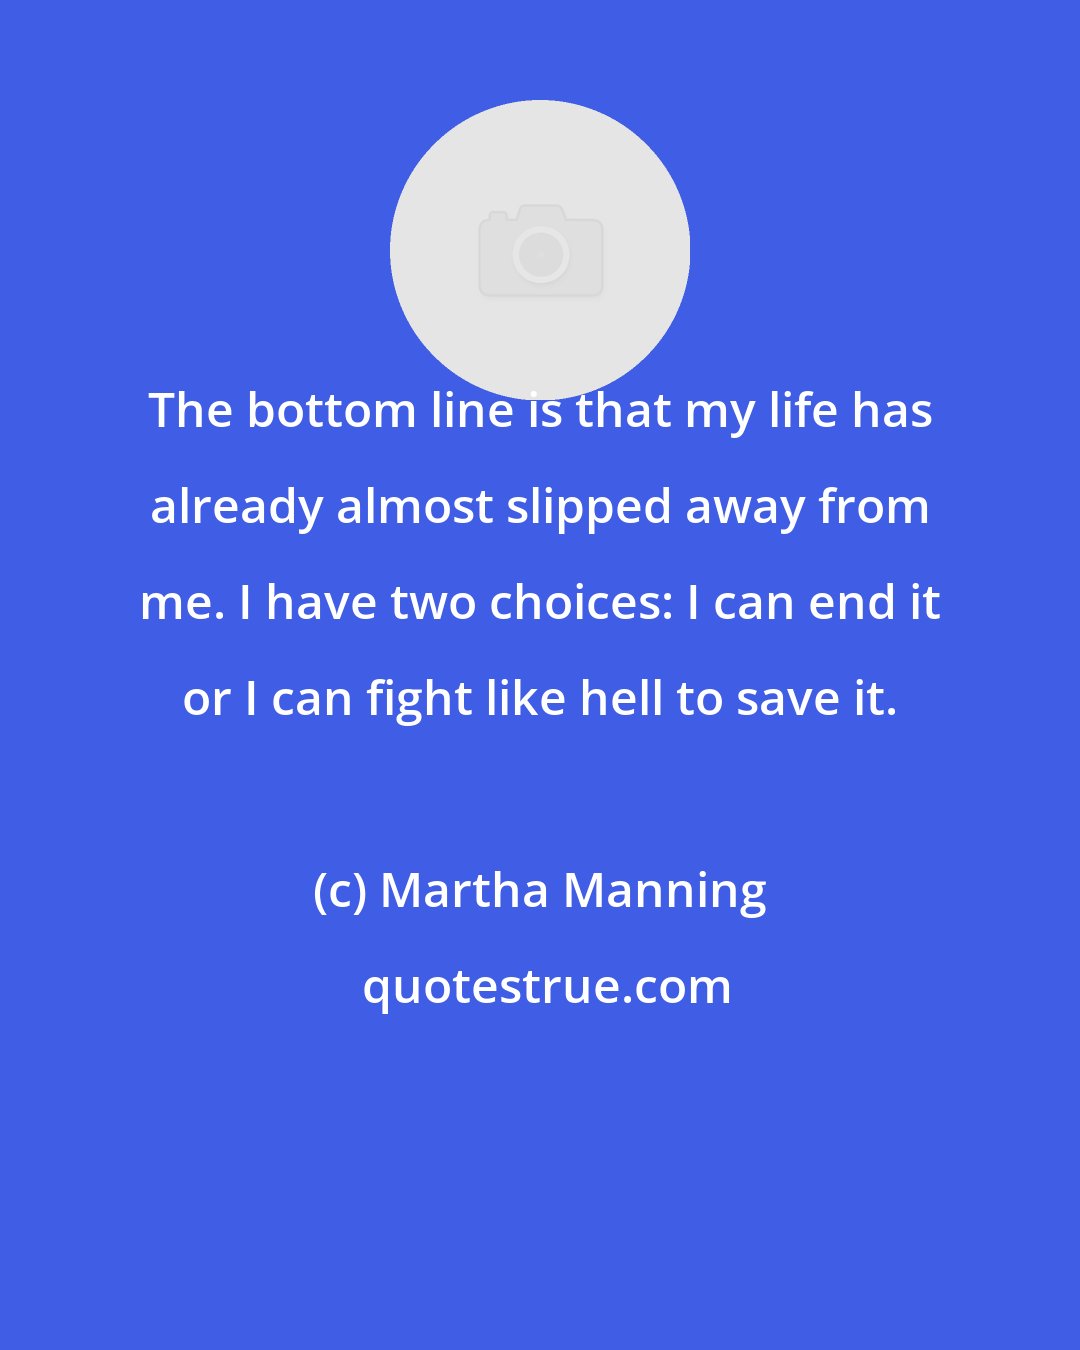 Martha Manning: The bottom line is that my life has already almost slipped away from me. I have two choices: I can end it or I can fight like hell to save it.